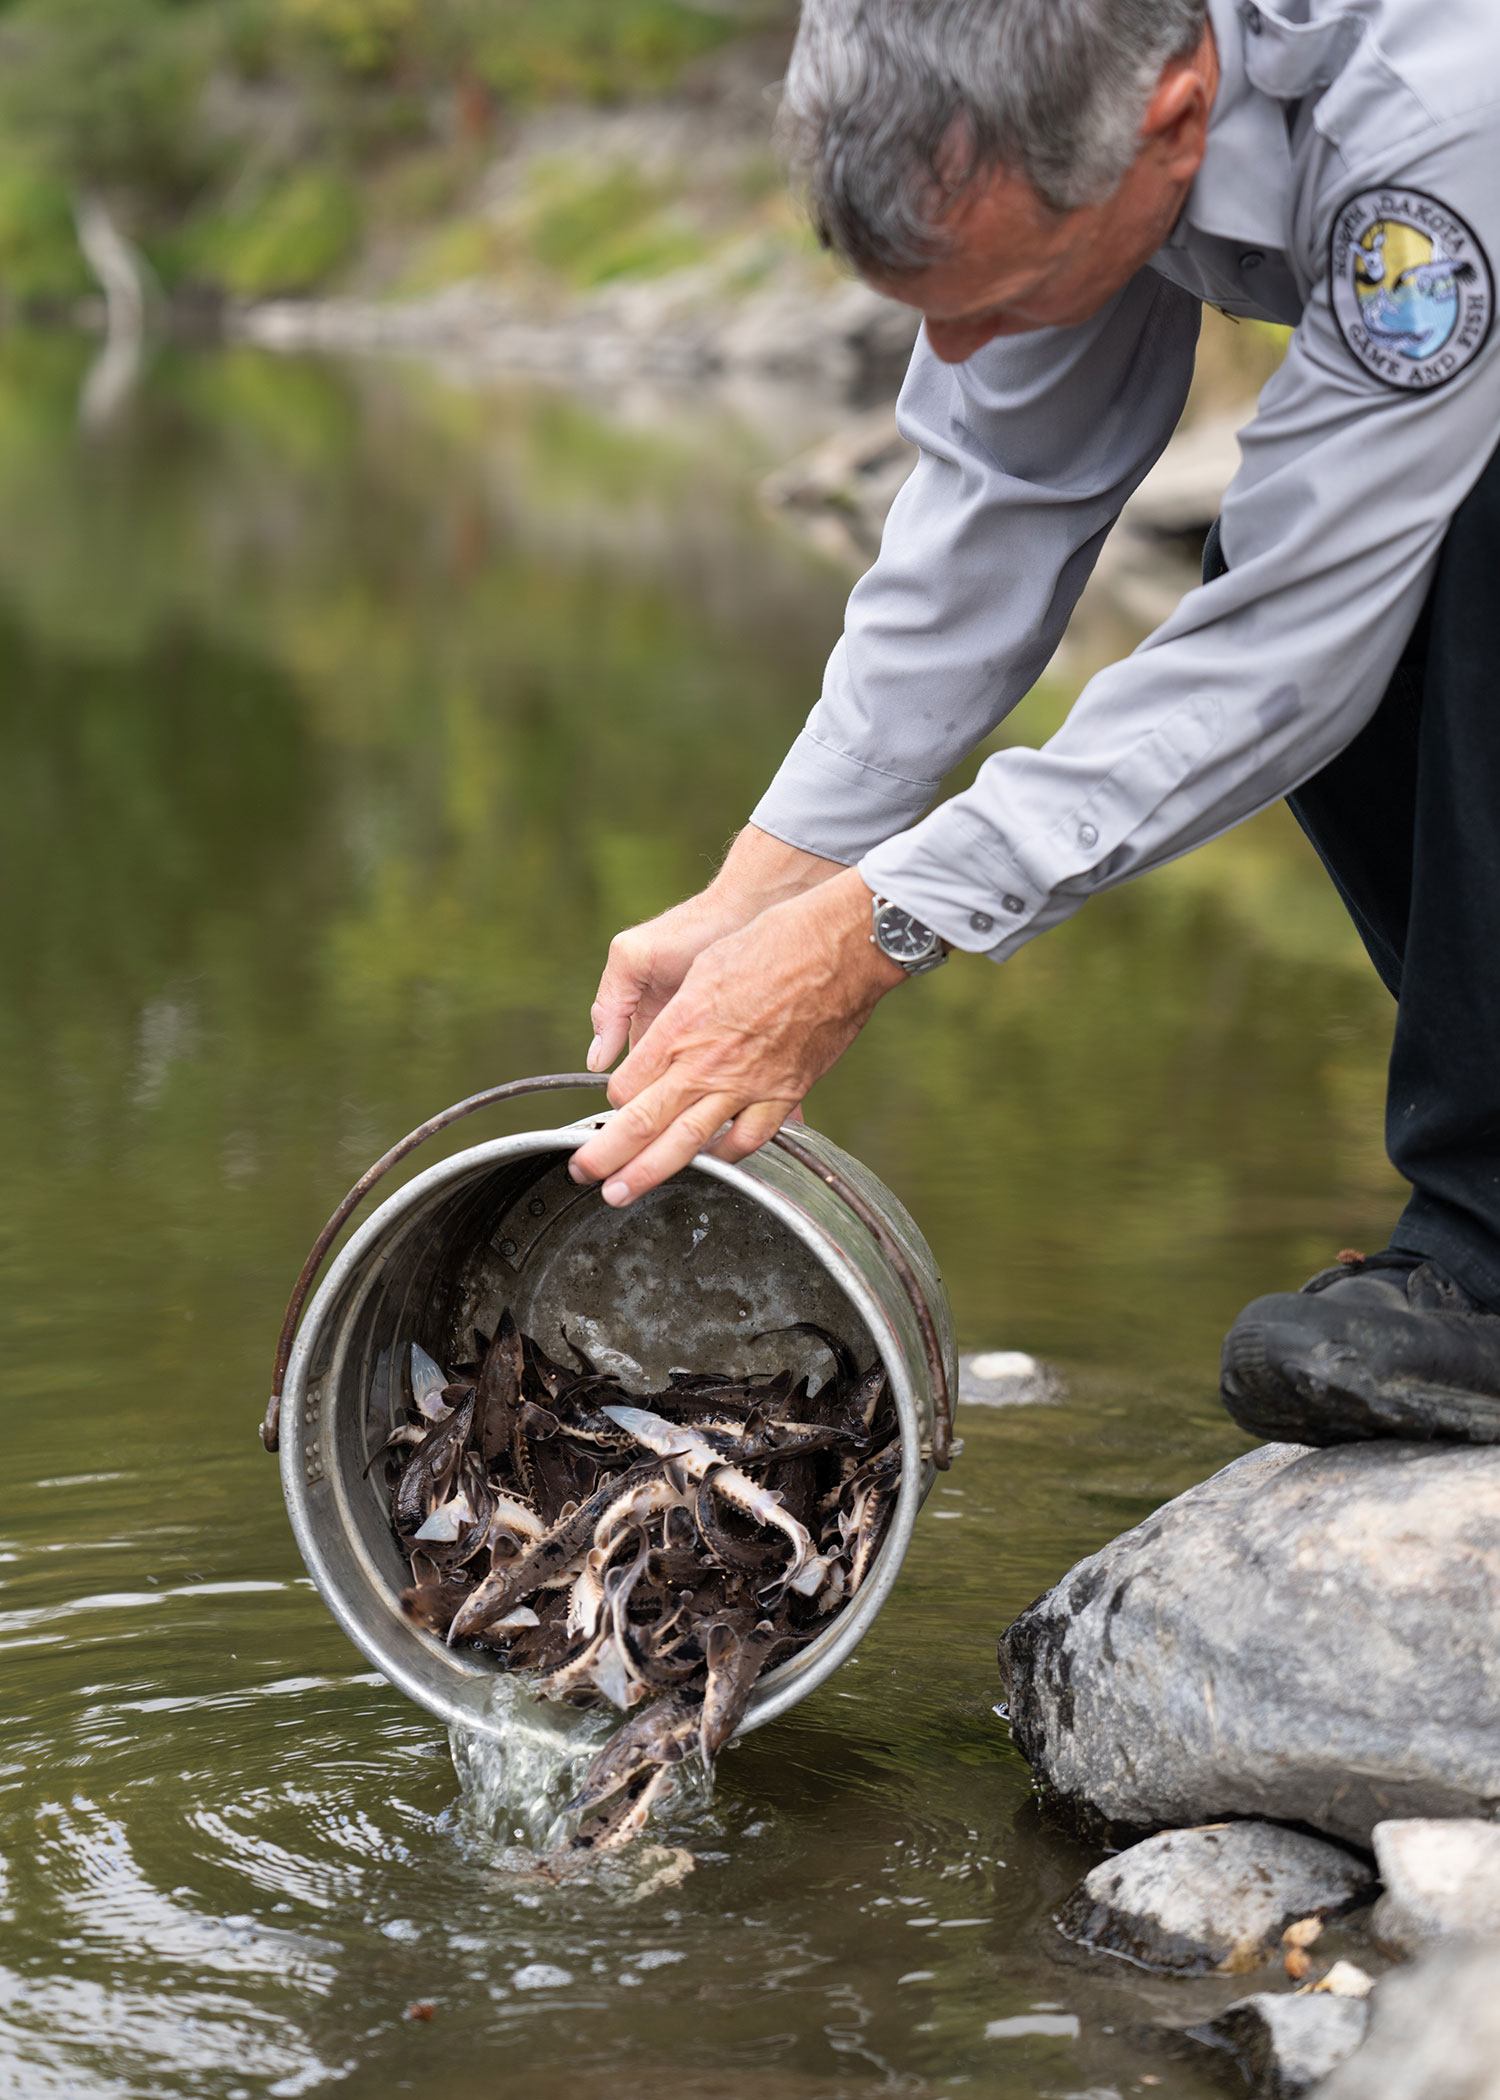 Biologist releasing young sturgeon into river from bucket